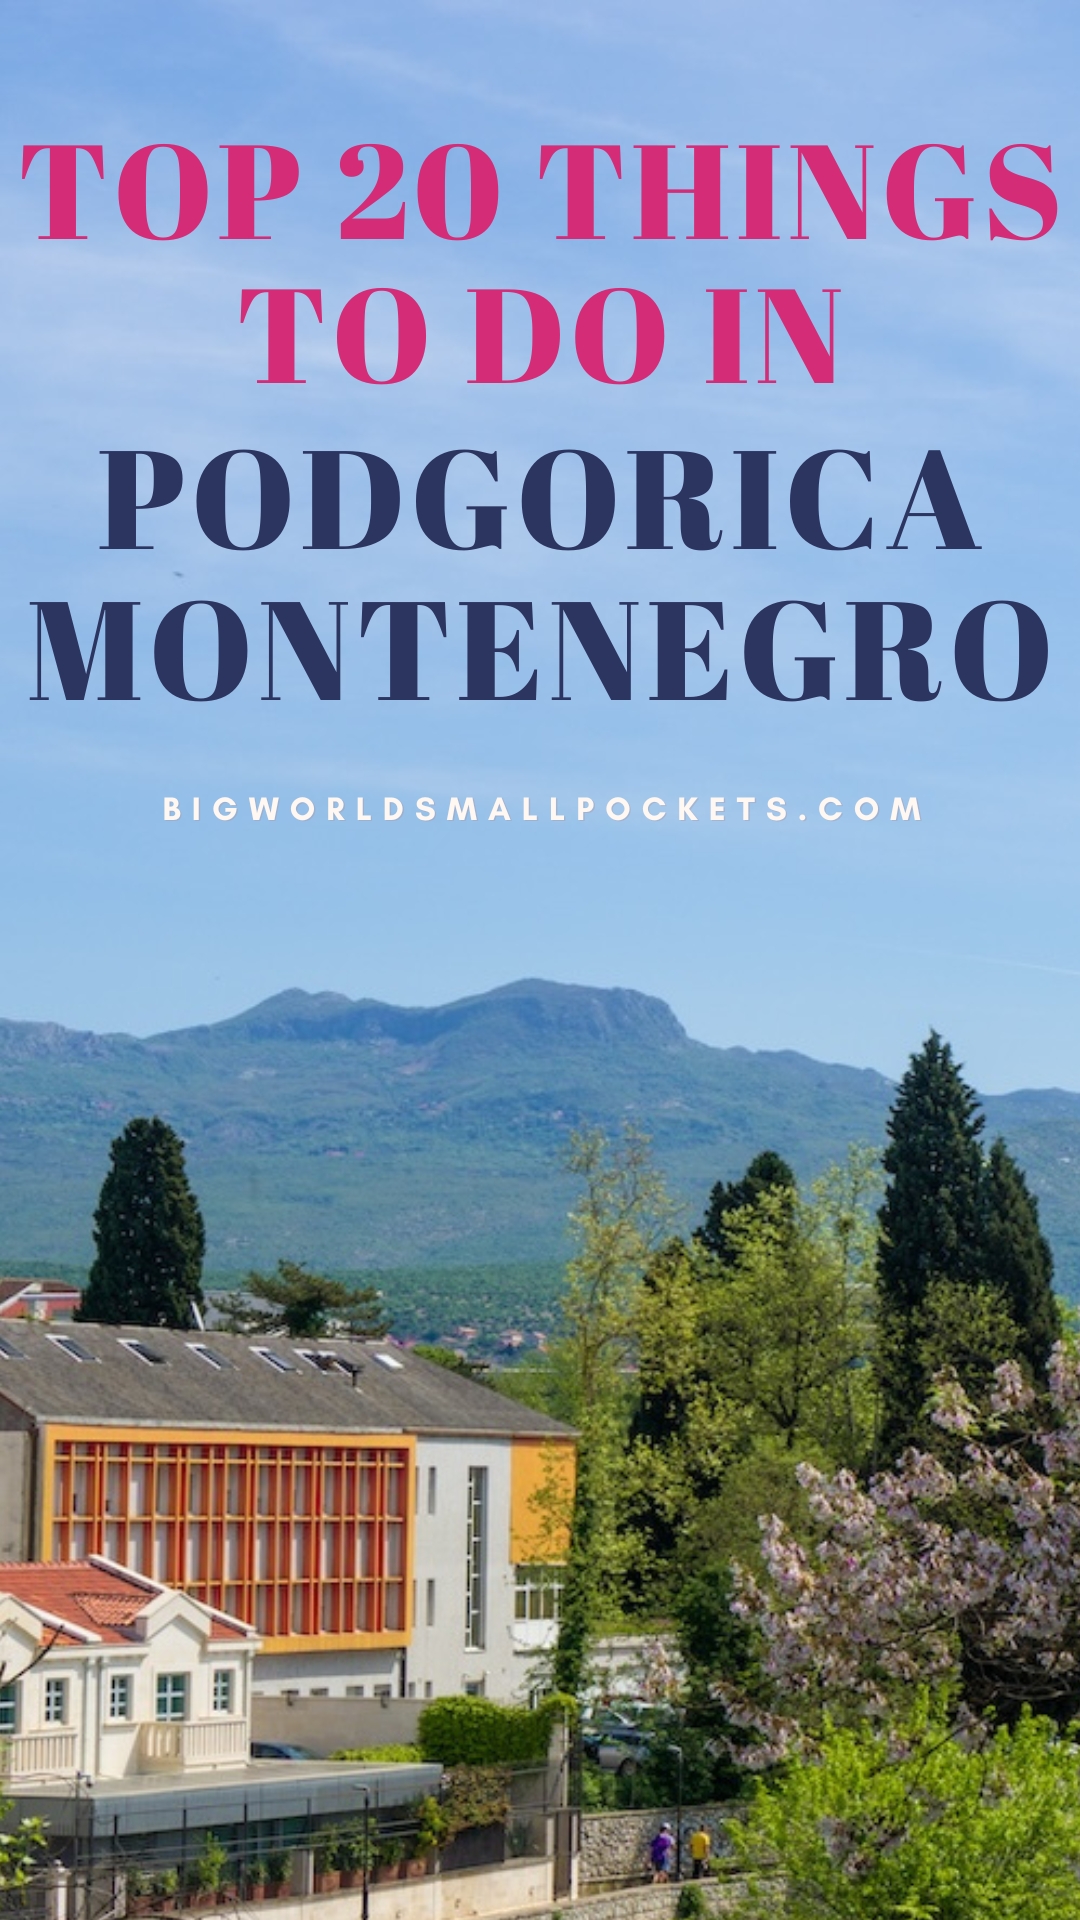 Best Things to Do in Podgorica in Montenegro